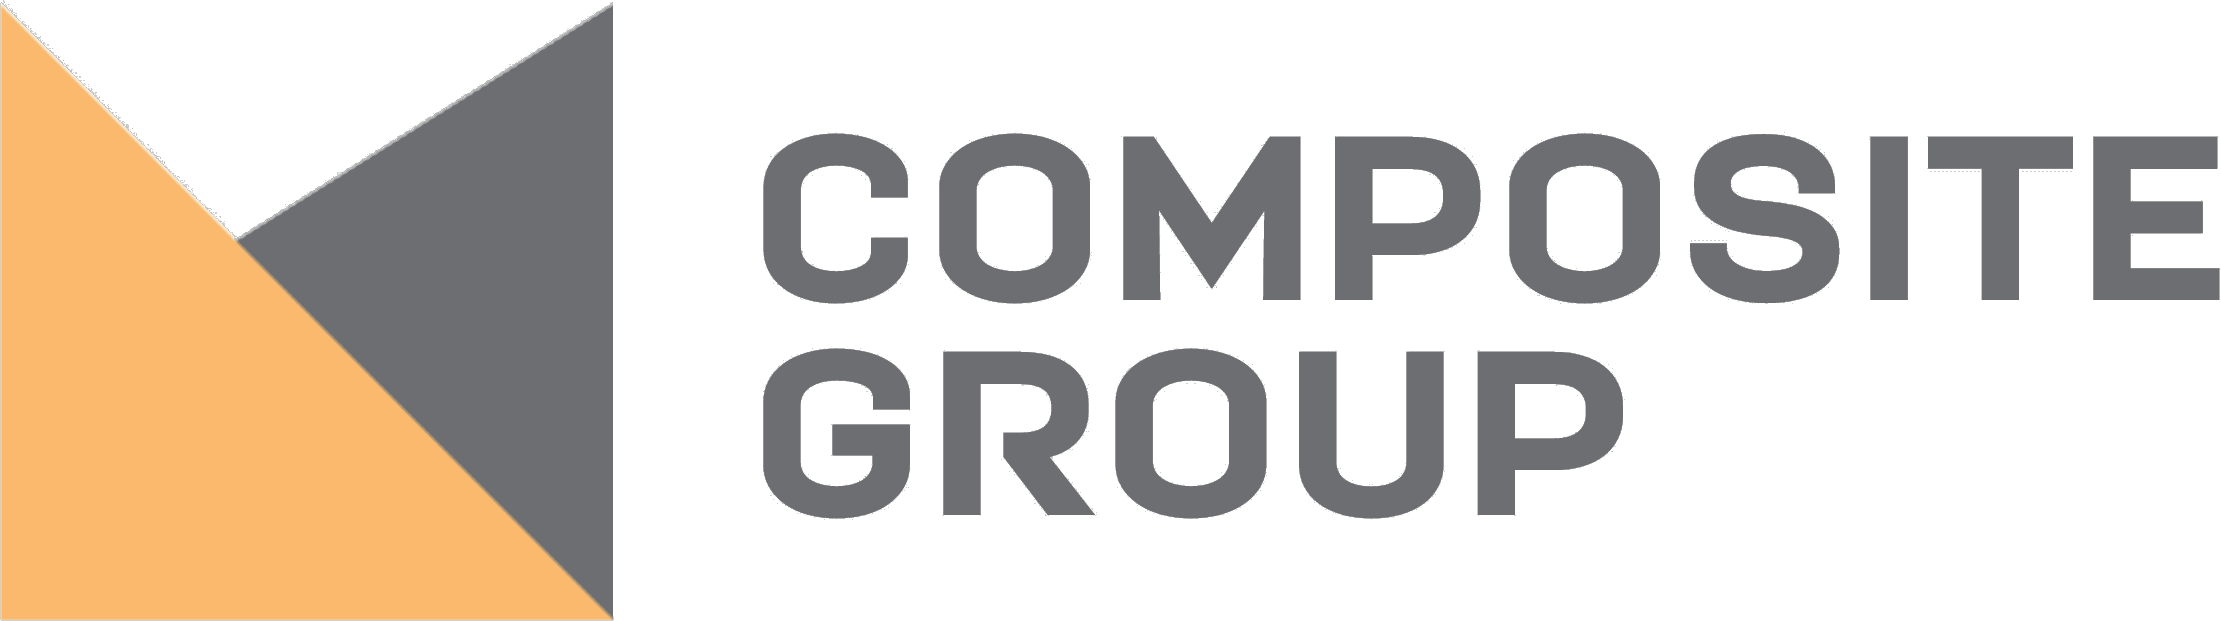 Composite Group